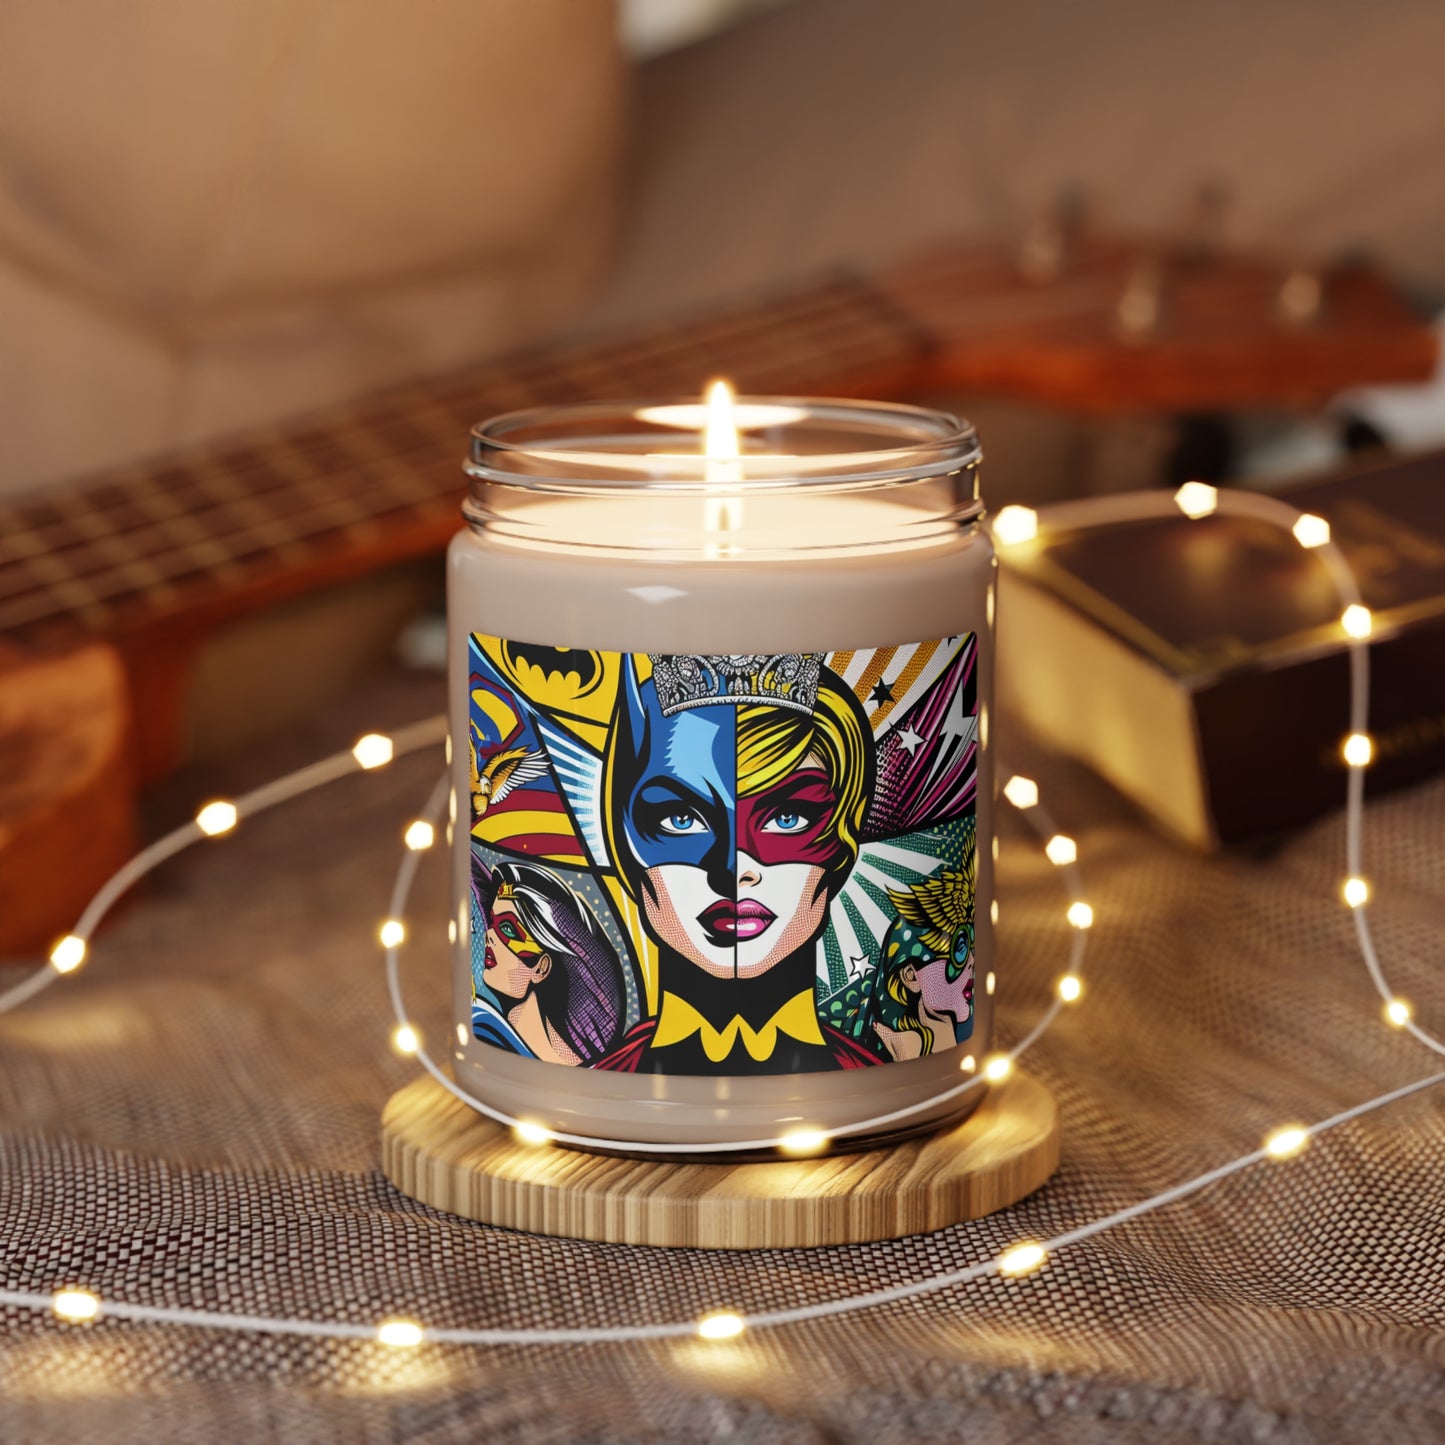 "Heroes of Pop Art: An Intermixing of Icons" - The Alien Scented Soy Candle 9oz Pop Art Style